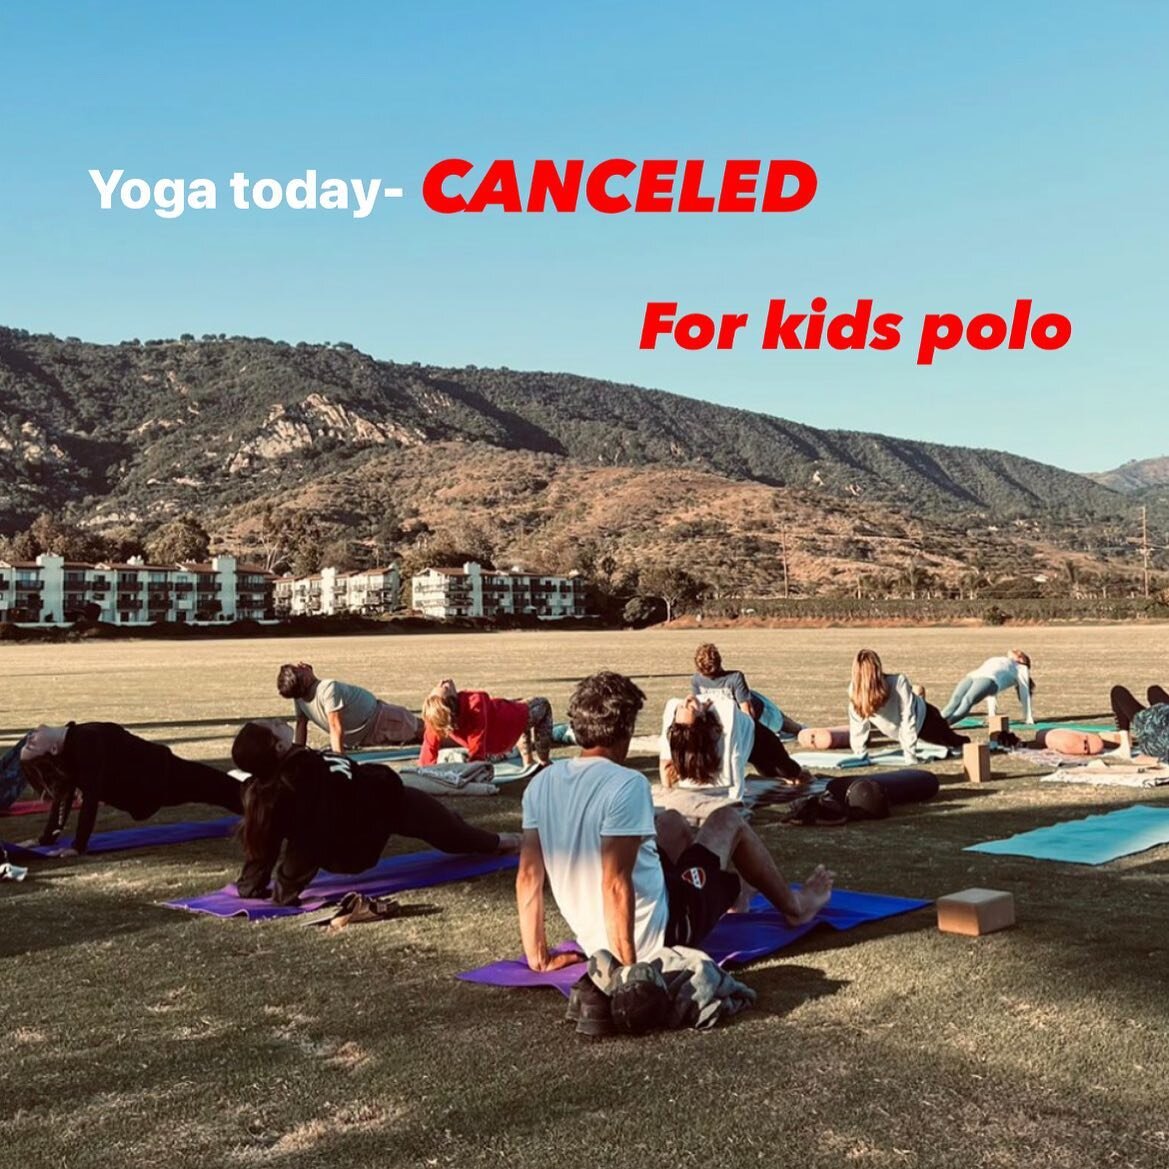 Hello everyone- yoga class will be canceled today. My 3 kids are playing in a kids tournament at the same time. Hope to see you tomorrow at 6:00 field 2 &hearts;️